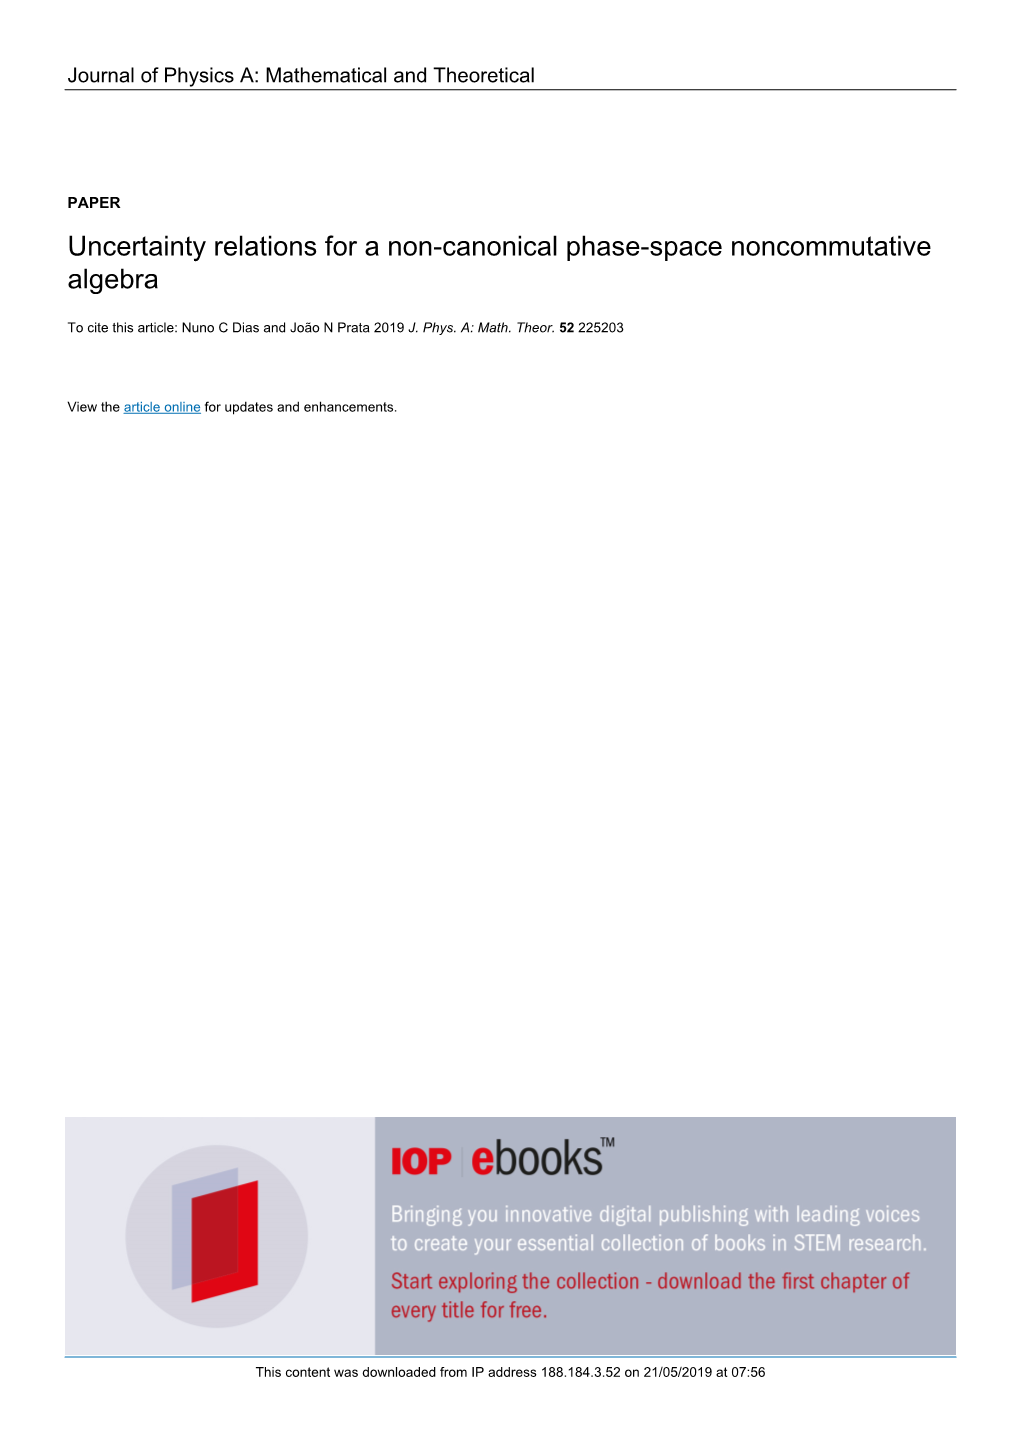 Uncertainty Relations for a Non-Canonical Phase-Space Noncommutative Algebra